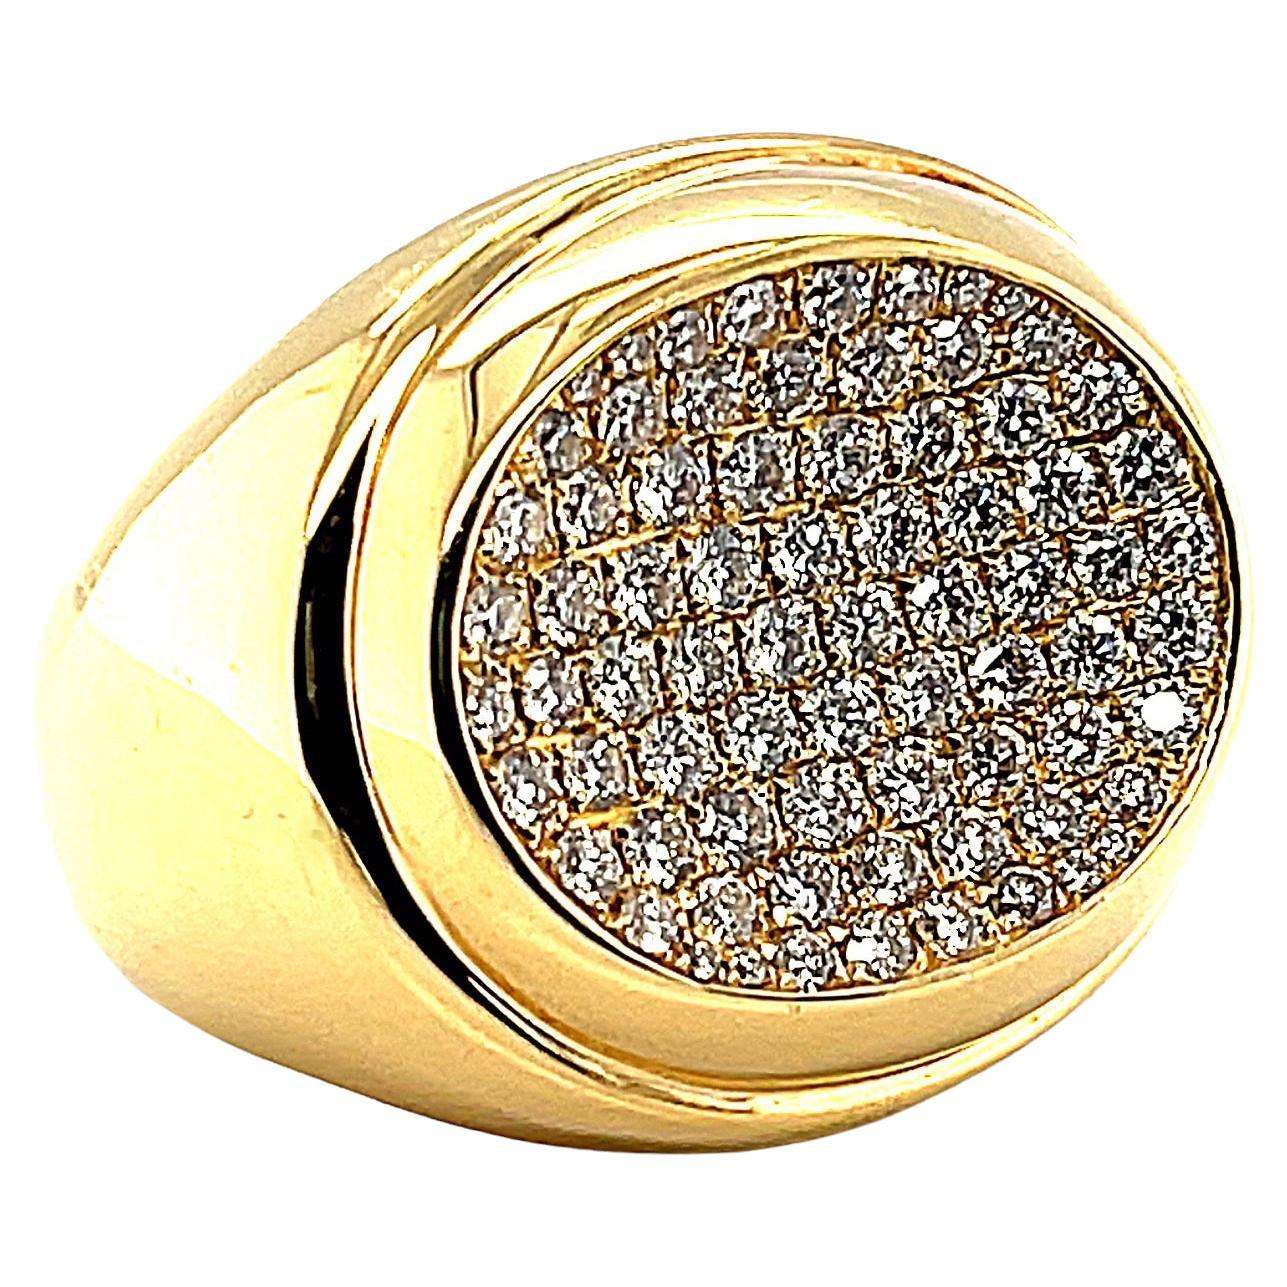 Diamond Pave Ring in 18k Yellow Gold, 1.94 Carat Total For Sale